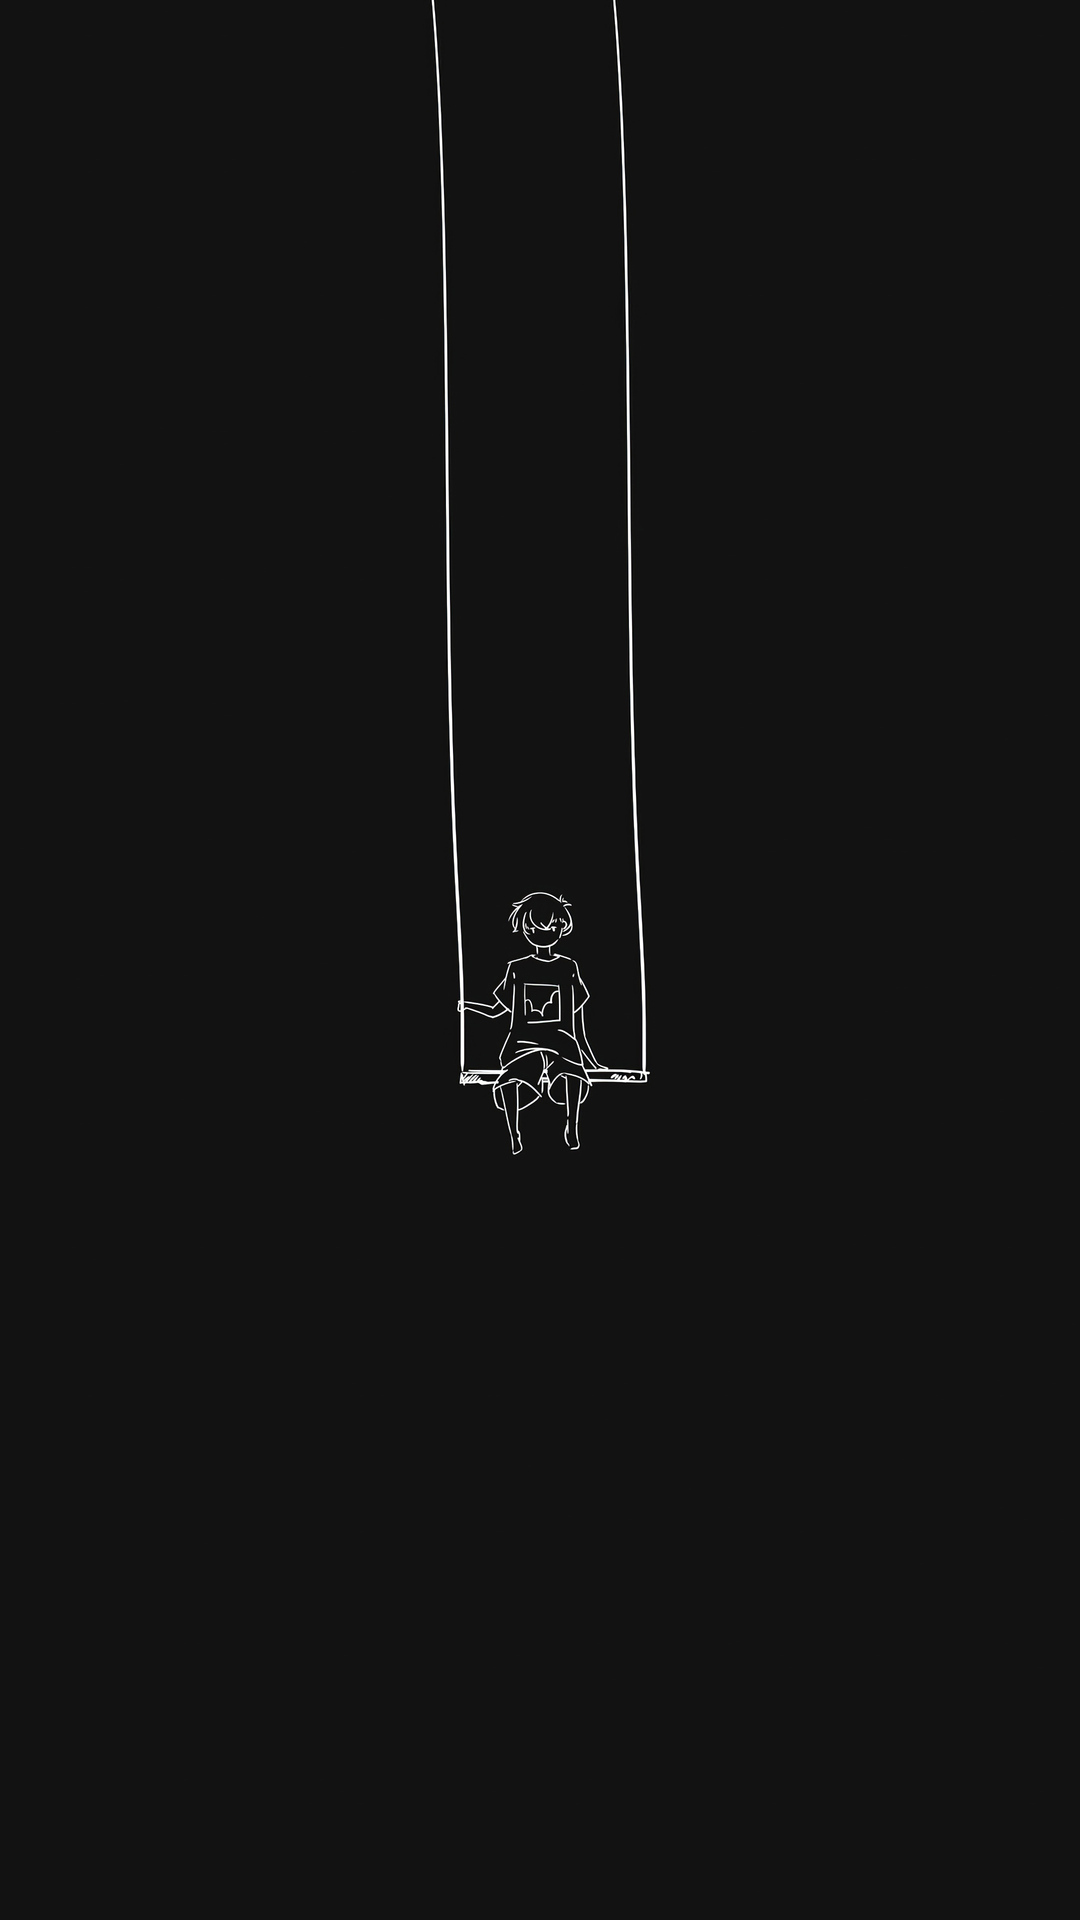 1080x19 Swing Minimalism 4k Iphone 7 6s 6 Plus Pixel Xl One Plus 3 3t 5 Hd 4k Wallpapers Images Backgrounds Photos And Pictures